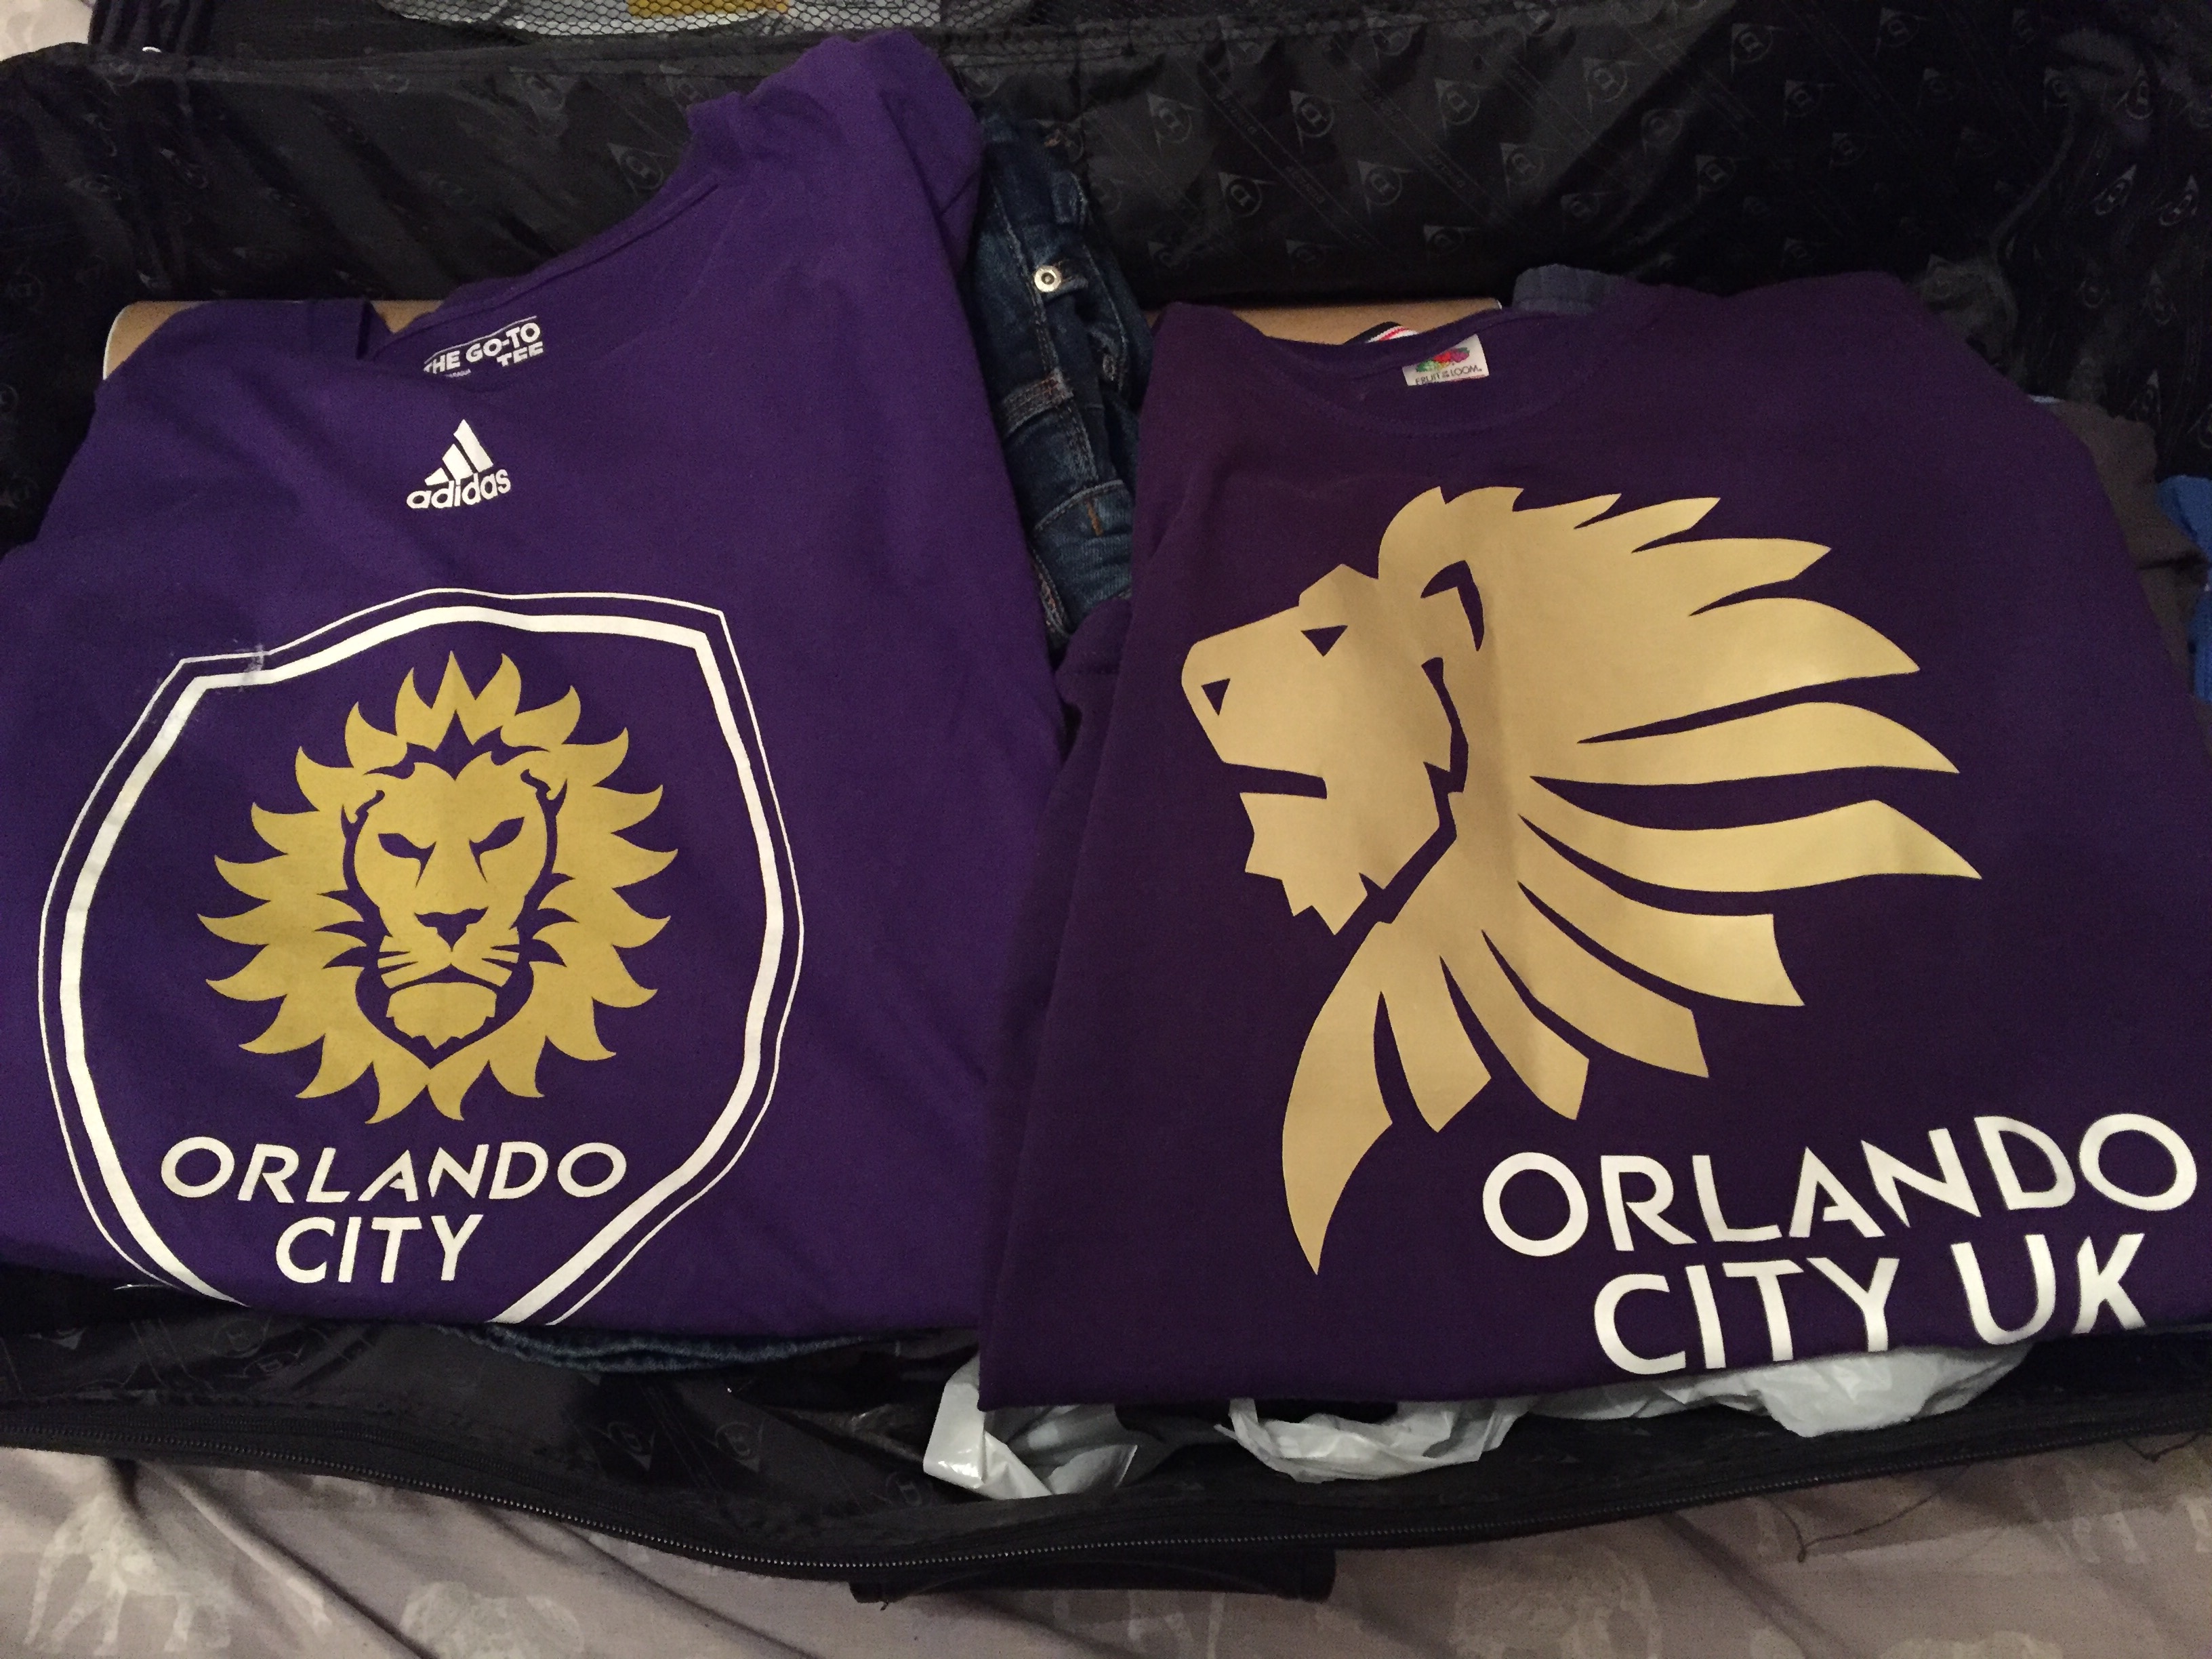 Announcement - Orlando City UK emigrating to Canada this March